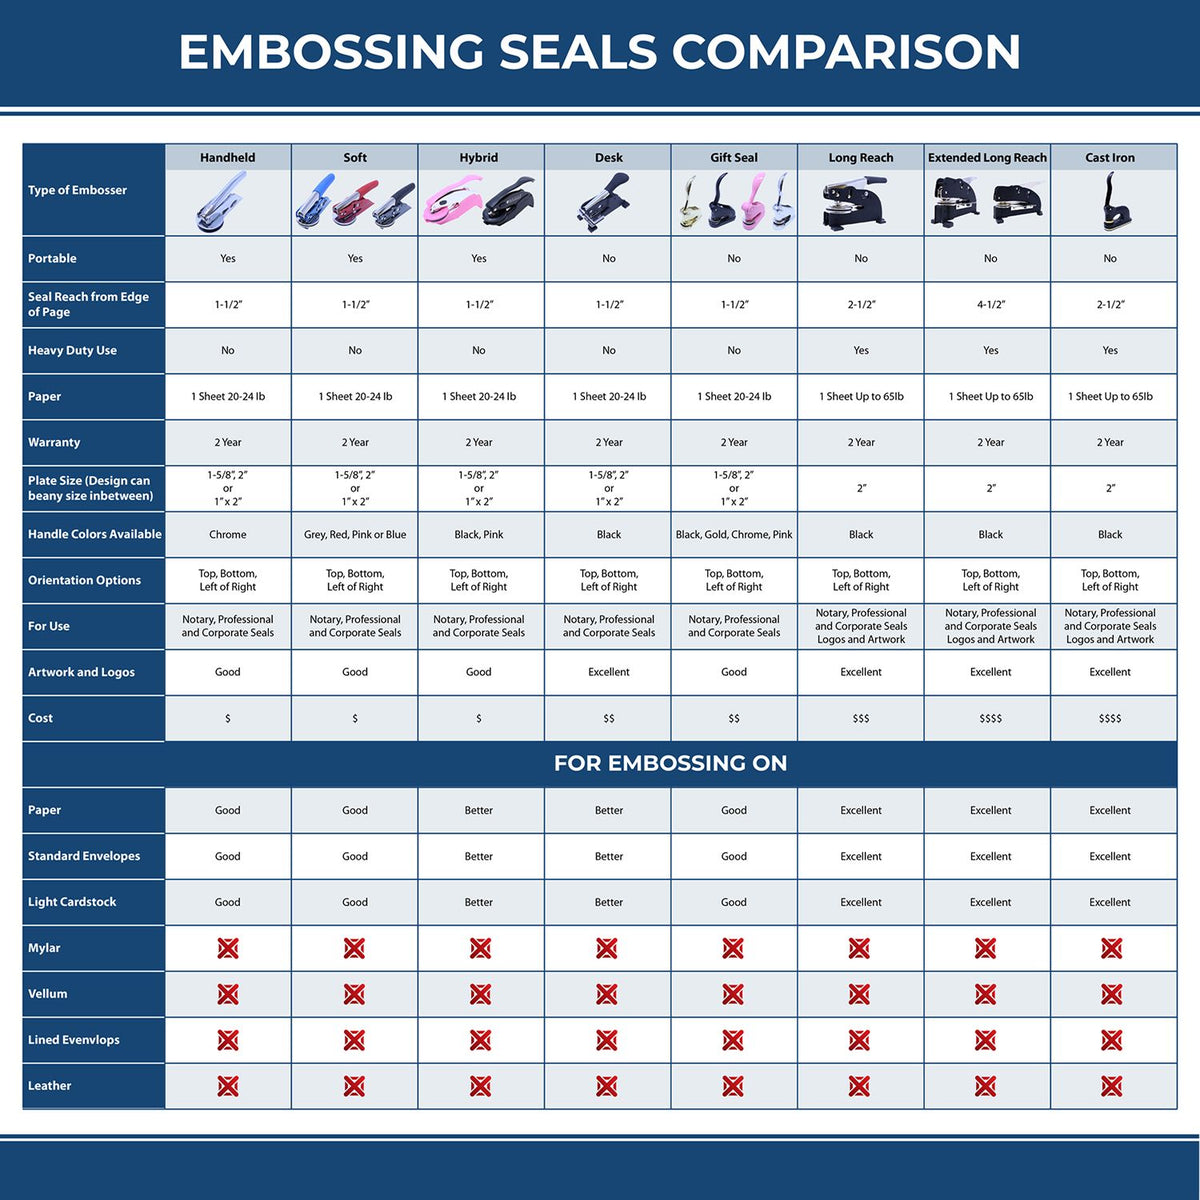 A comparison chart for the different types of mount models available for the Hybrid Michigan Landscape Architect Seal